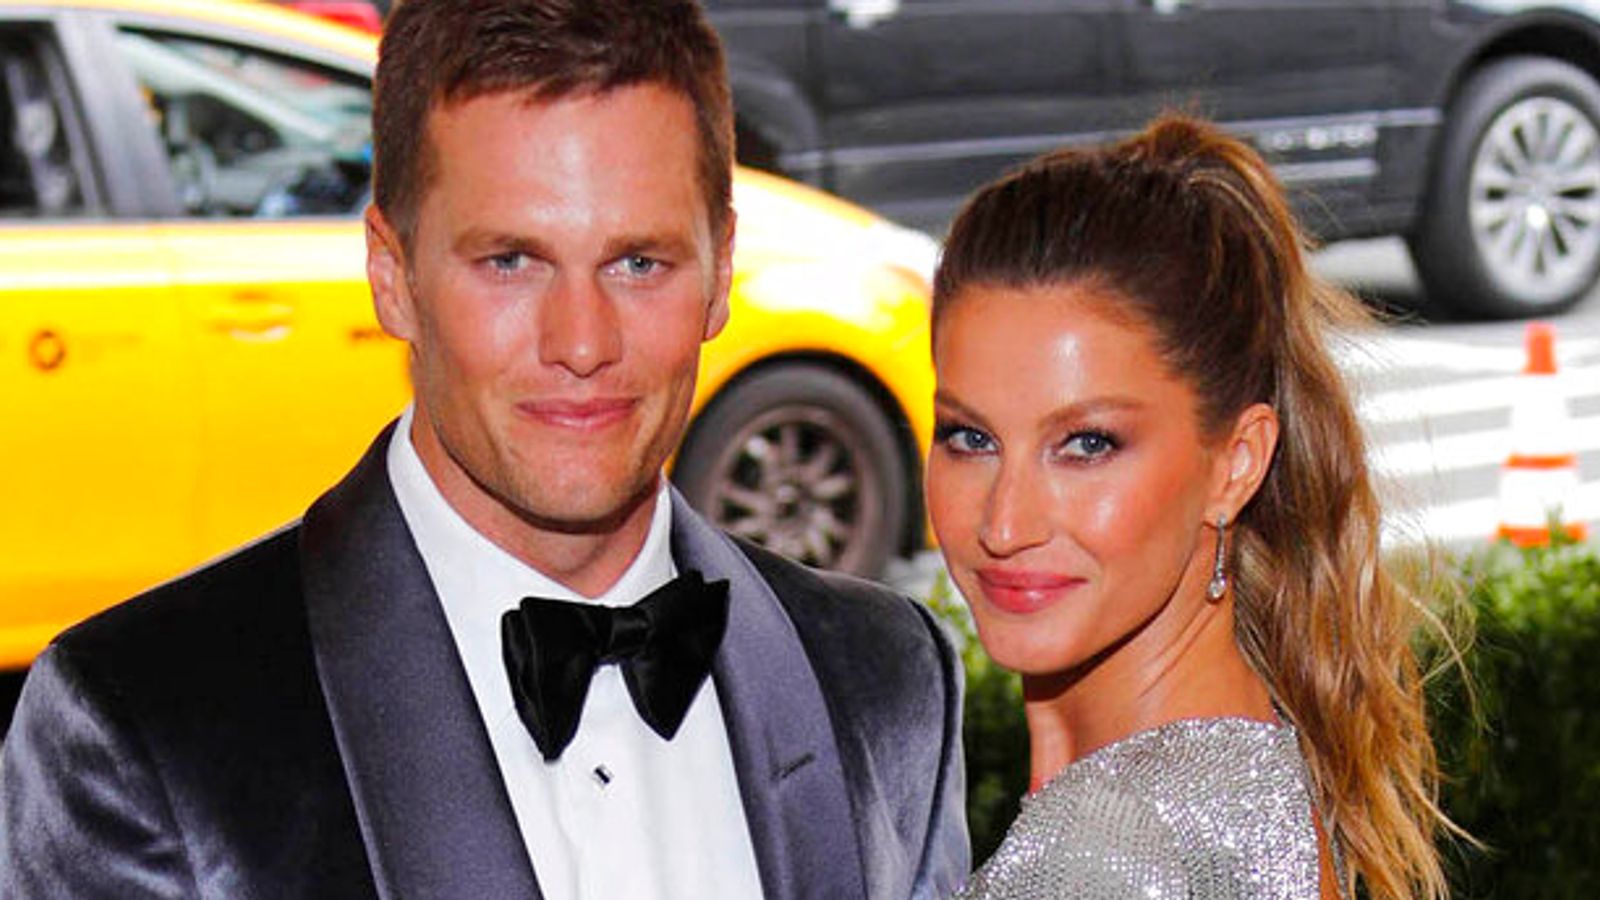 Tom Brady and Gisele Bundchen reveal 'painful and difficult' divorce after 'growing apart'